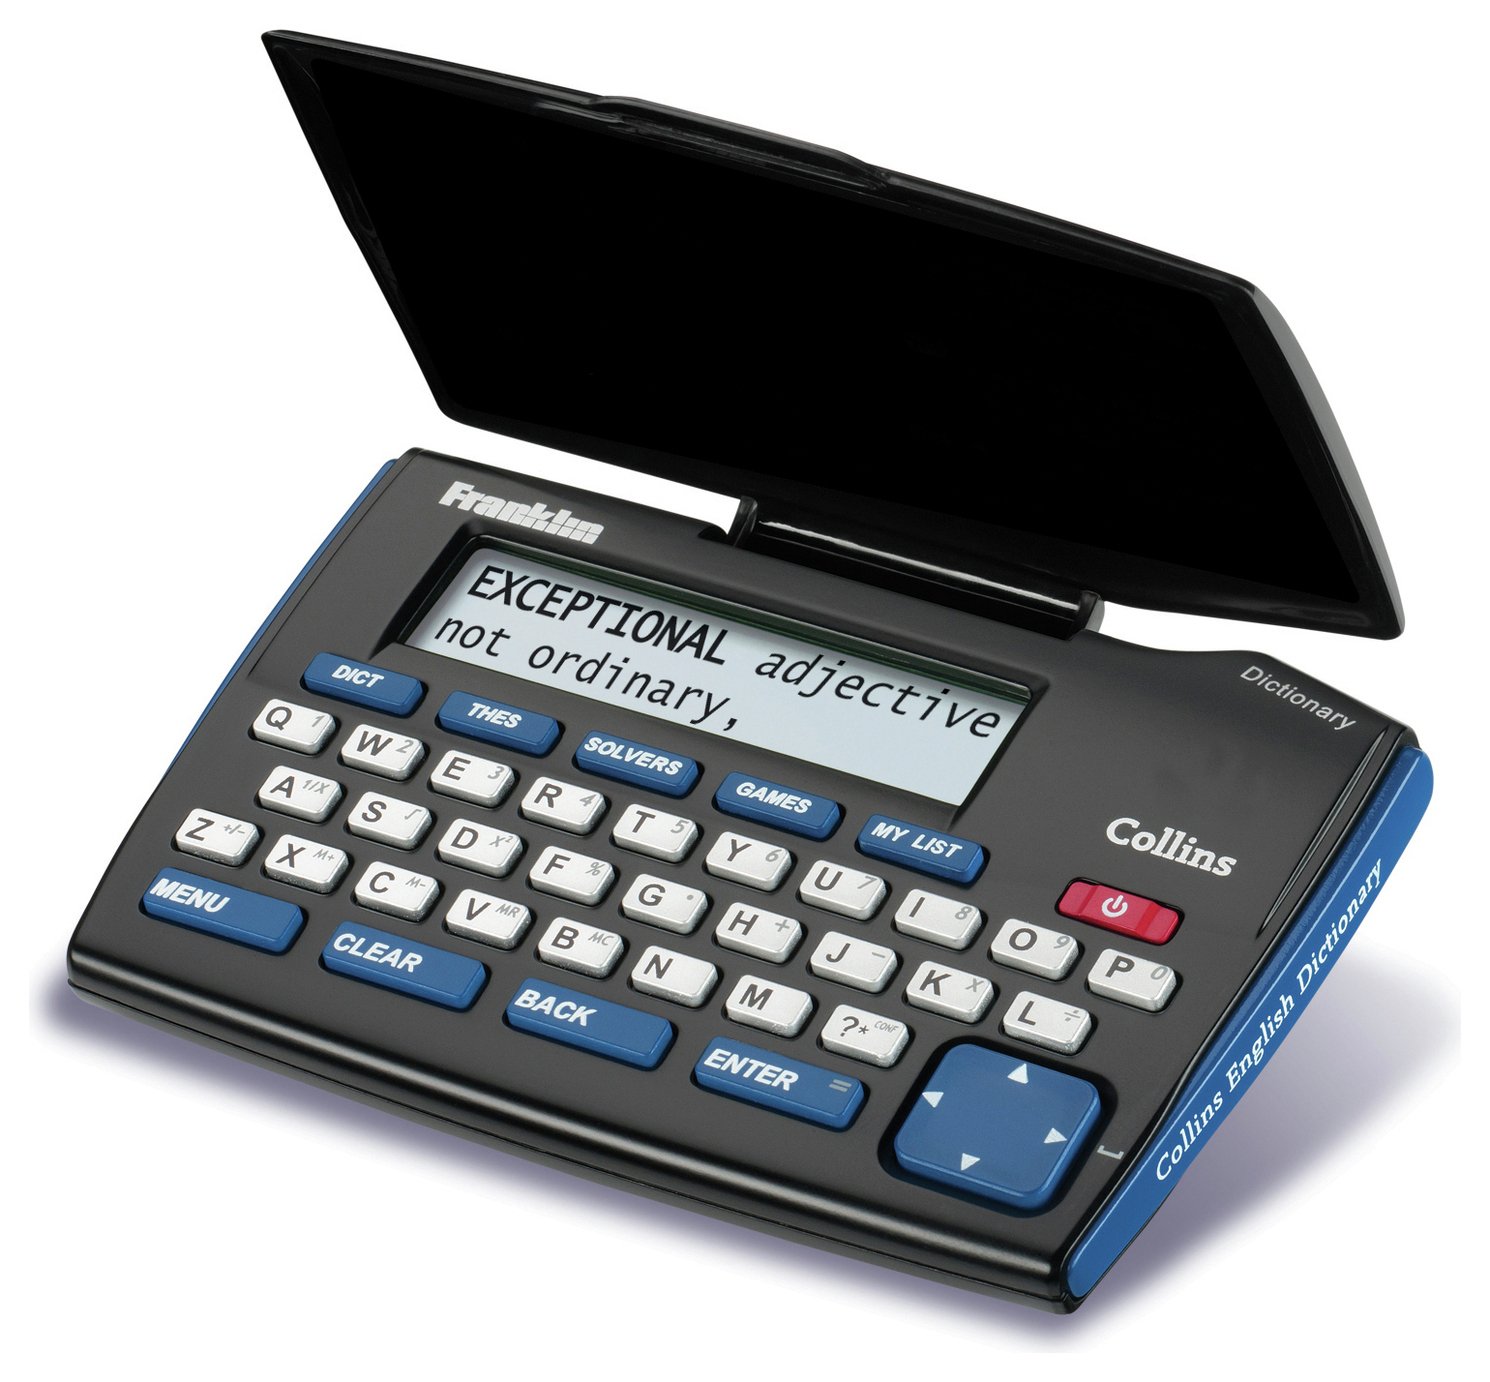 Collins DMQ-221 Dictionary and Thesaurus